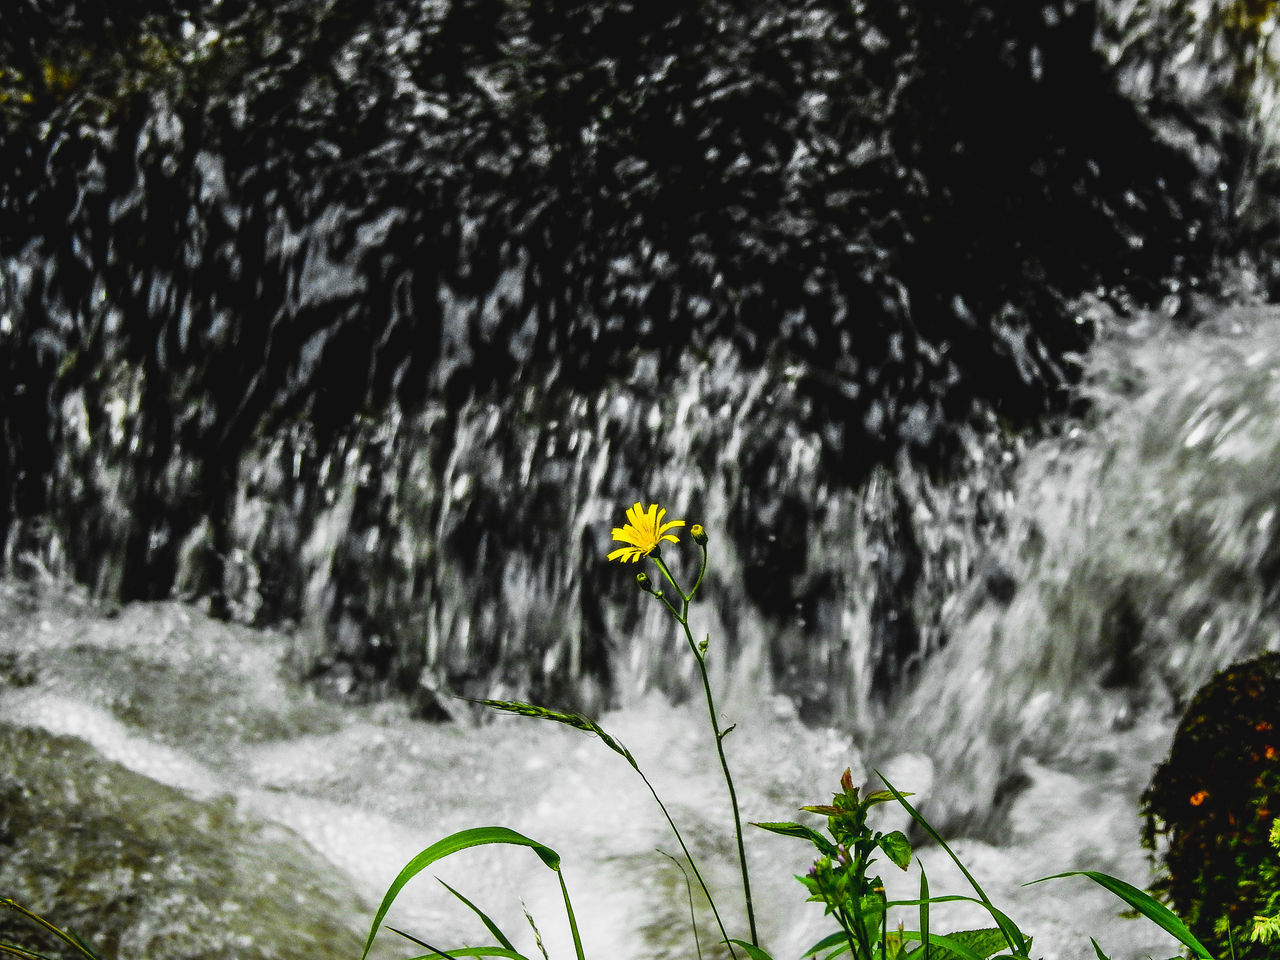 LOW ANGLE VIEW OF YELLOW FLOWER IN WATER